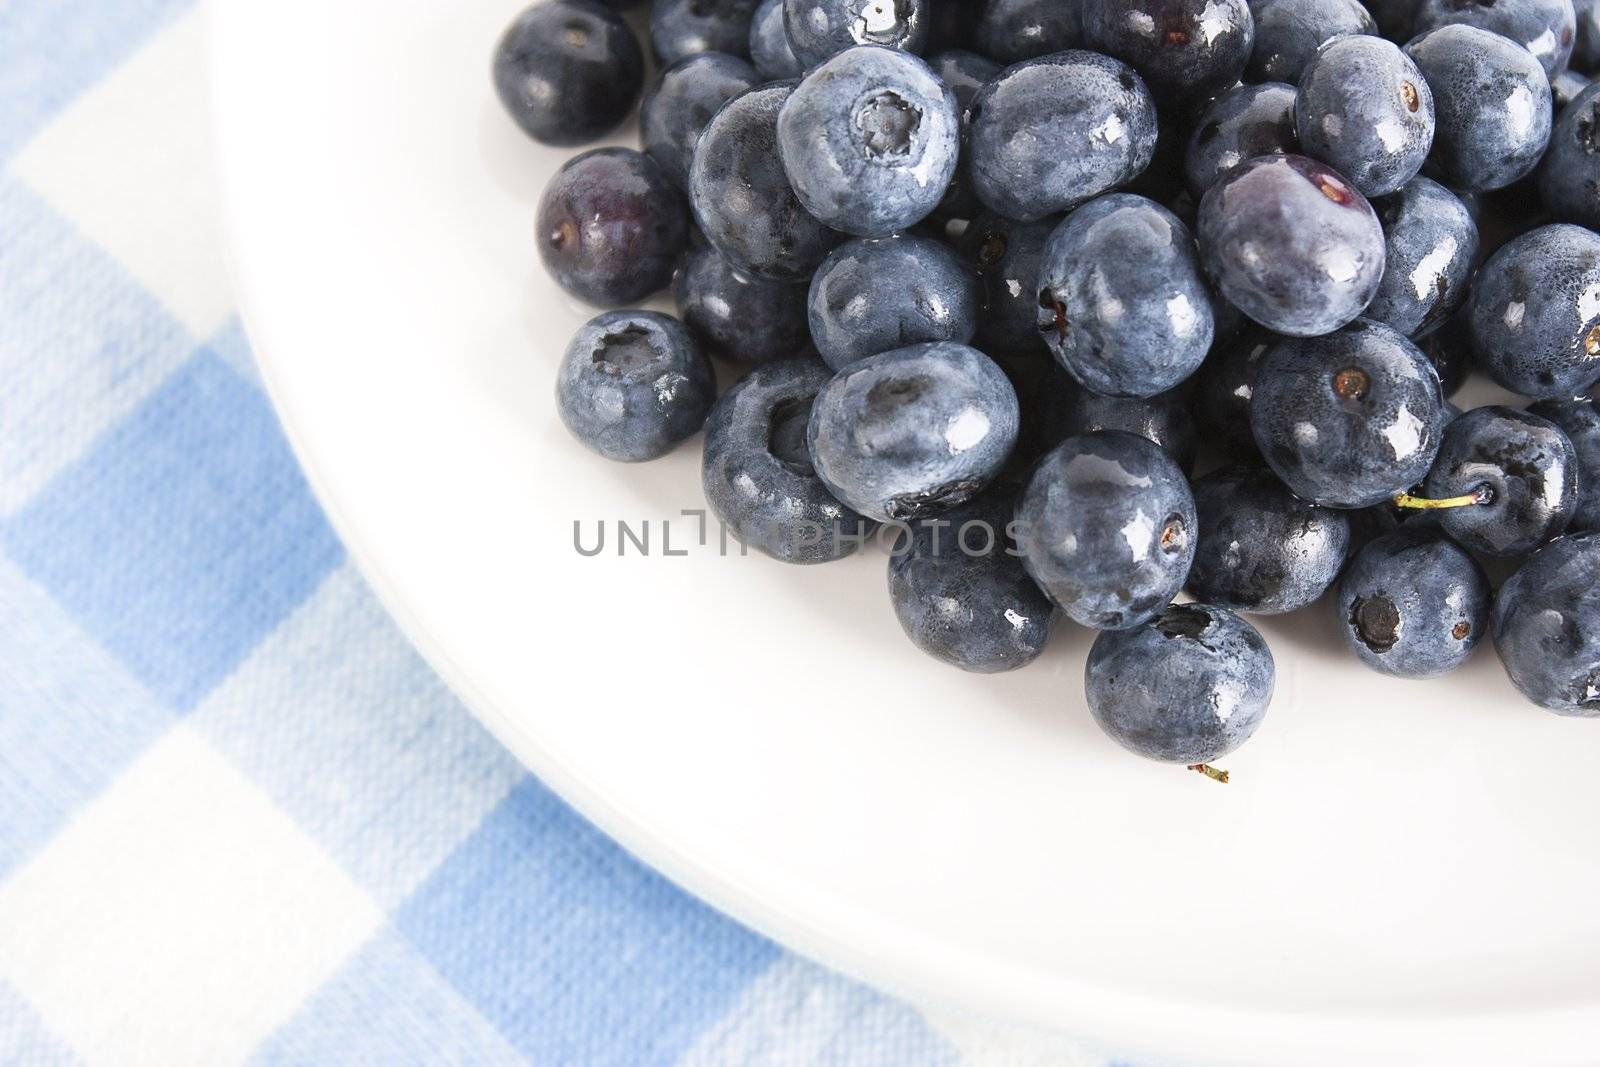 Closeup of blueberries on white plate and blue and white linen tablecloth